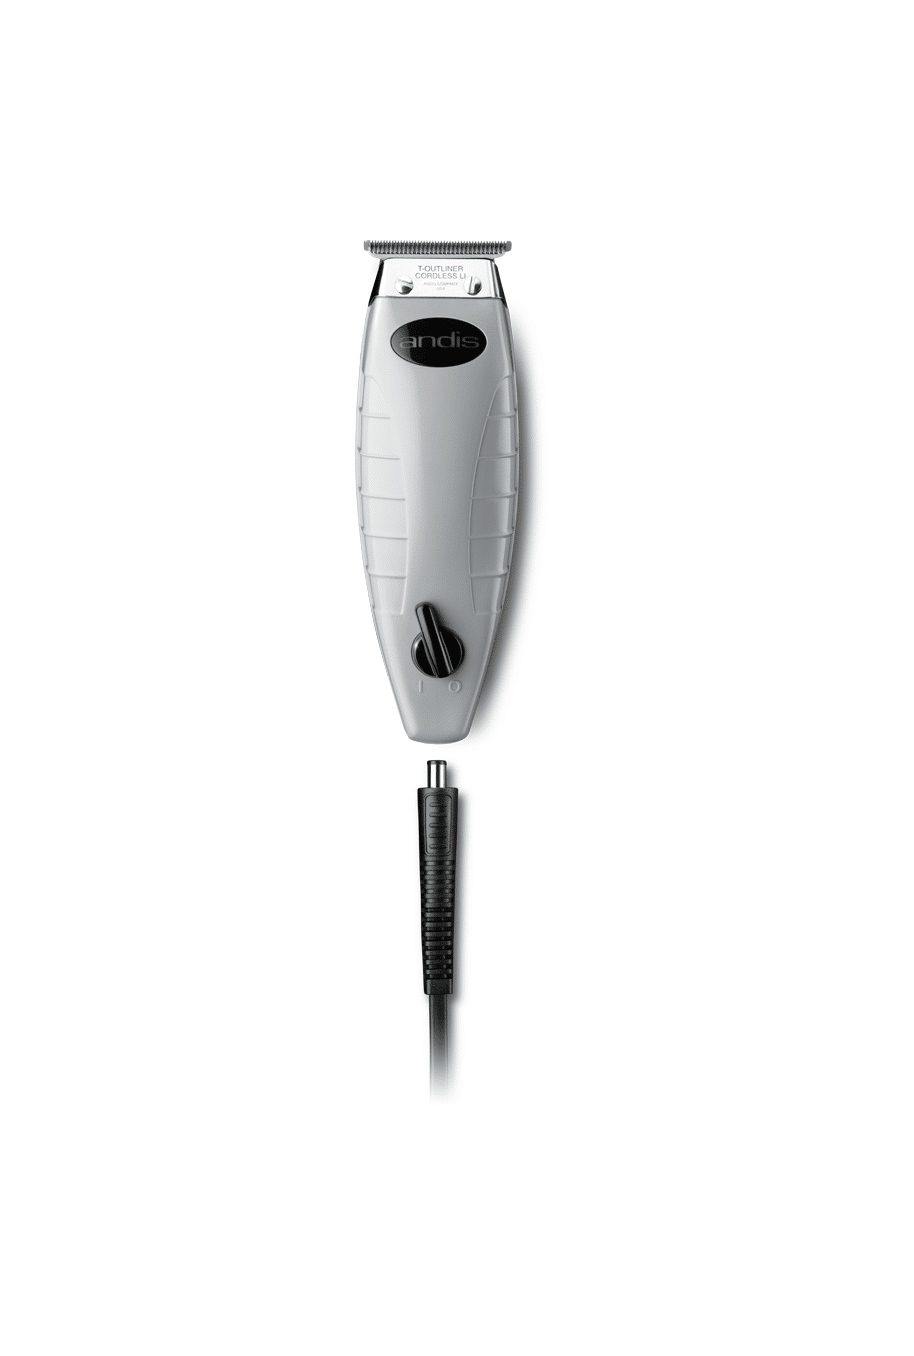 andis t outliner cordless blade